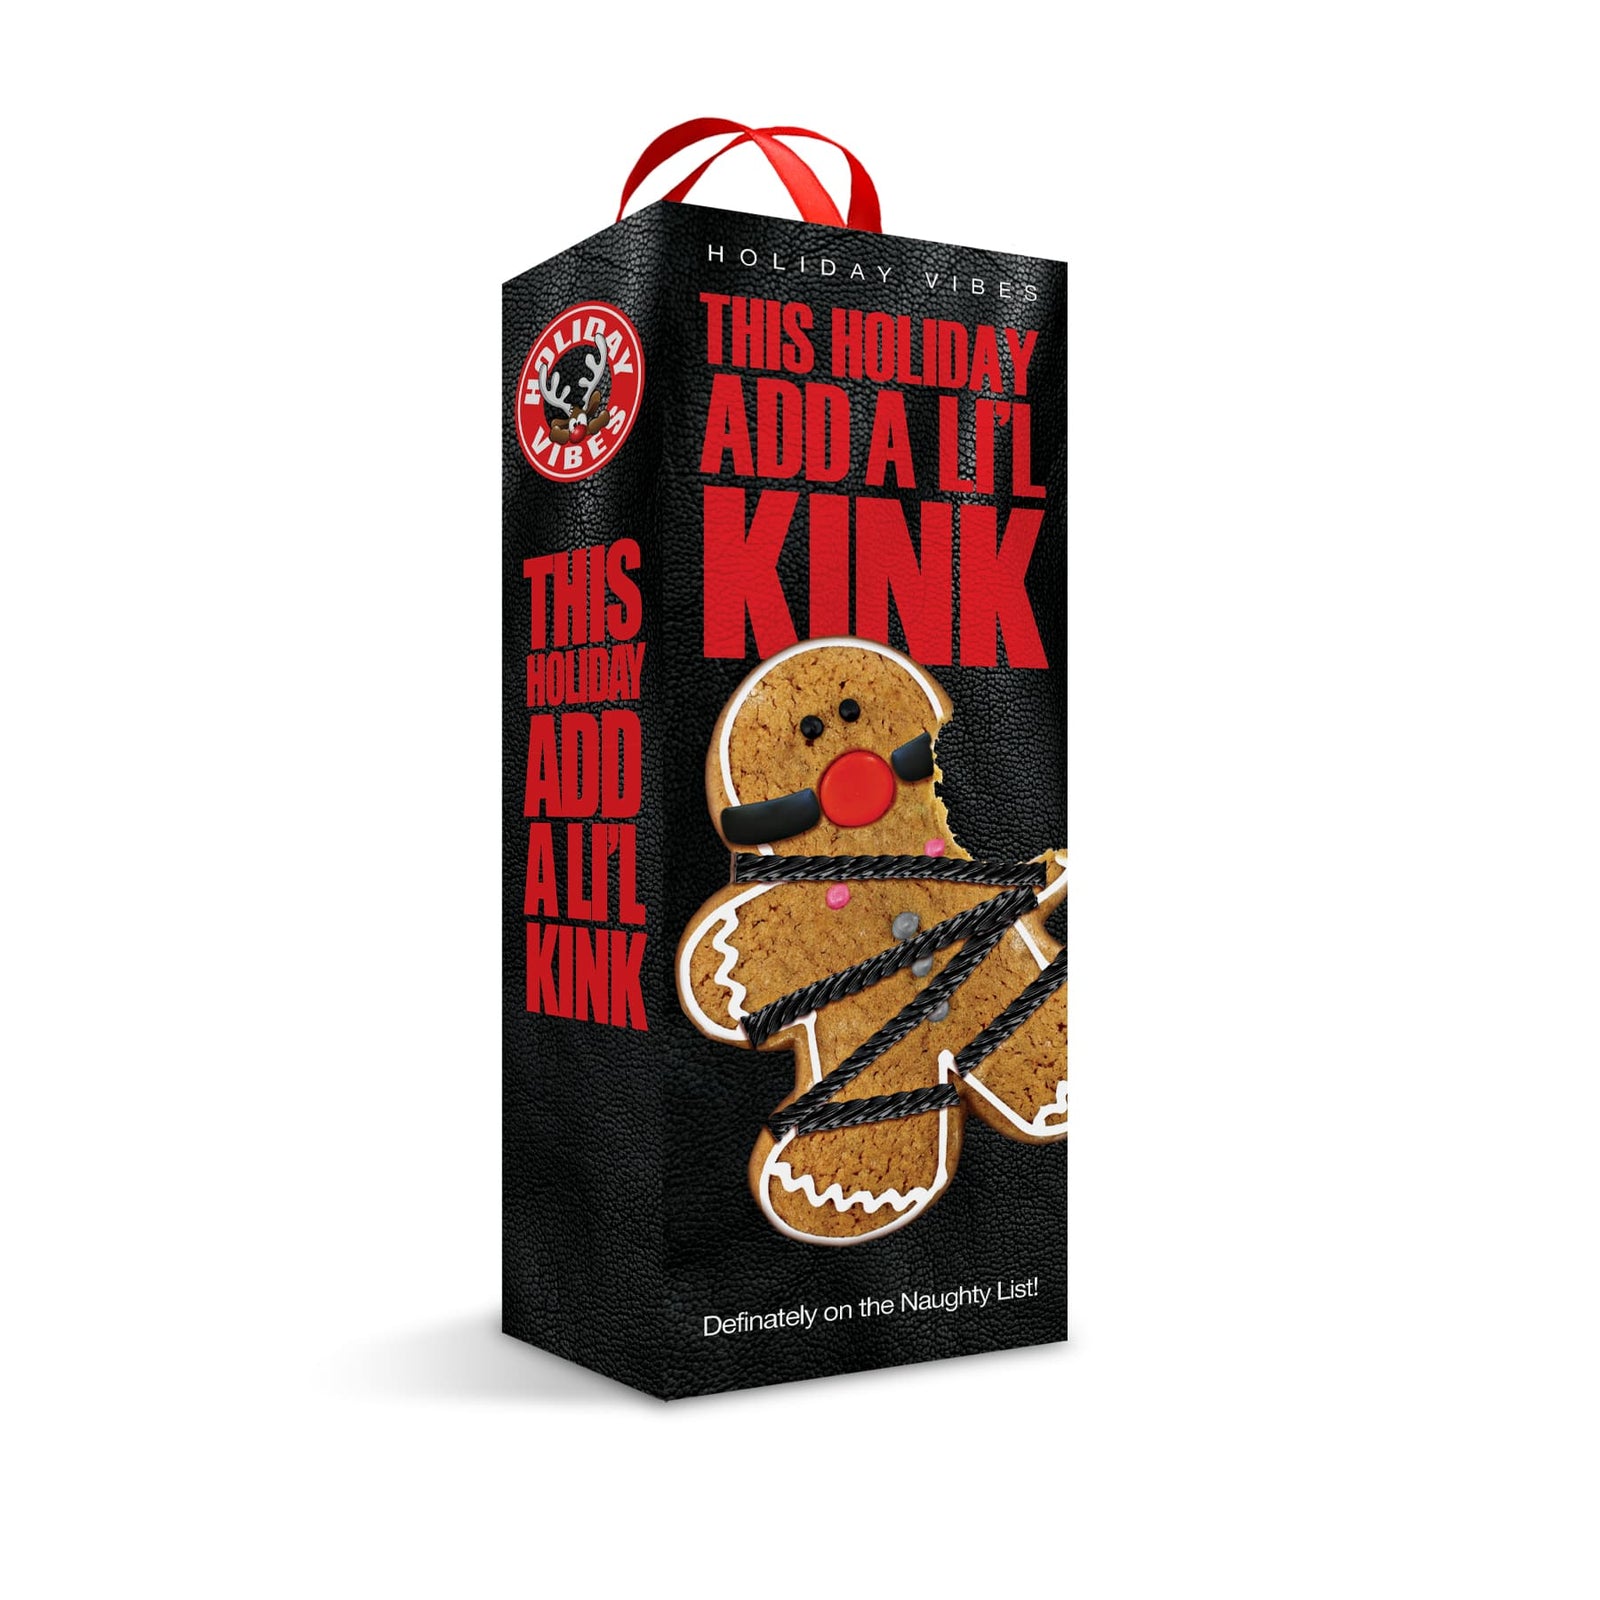 Holiday Vibes Naughty List Gift Add A Li'l Kink, Blindfold, Wrist and Ankle Sashes w/storage bag - The Happy Ending Shop